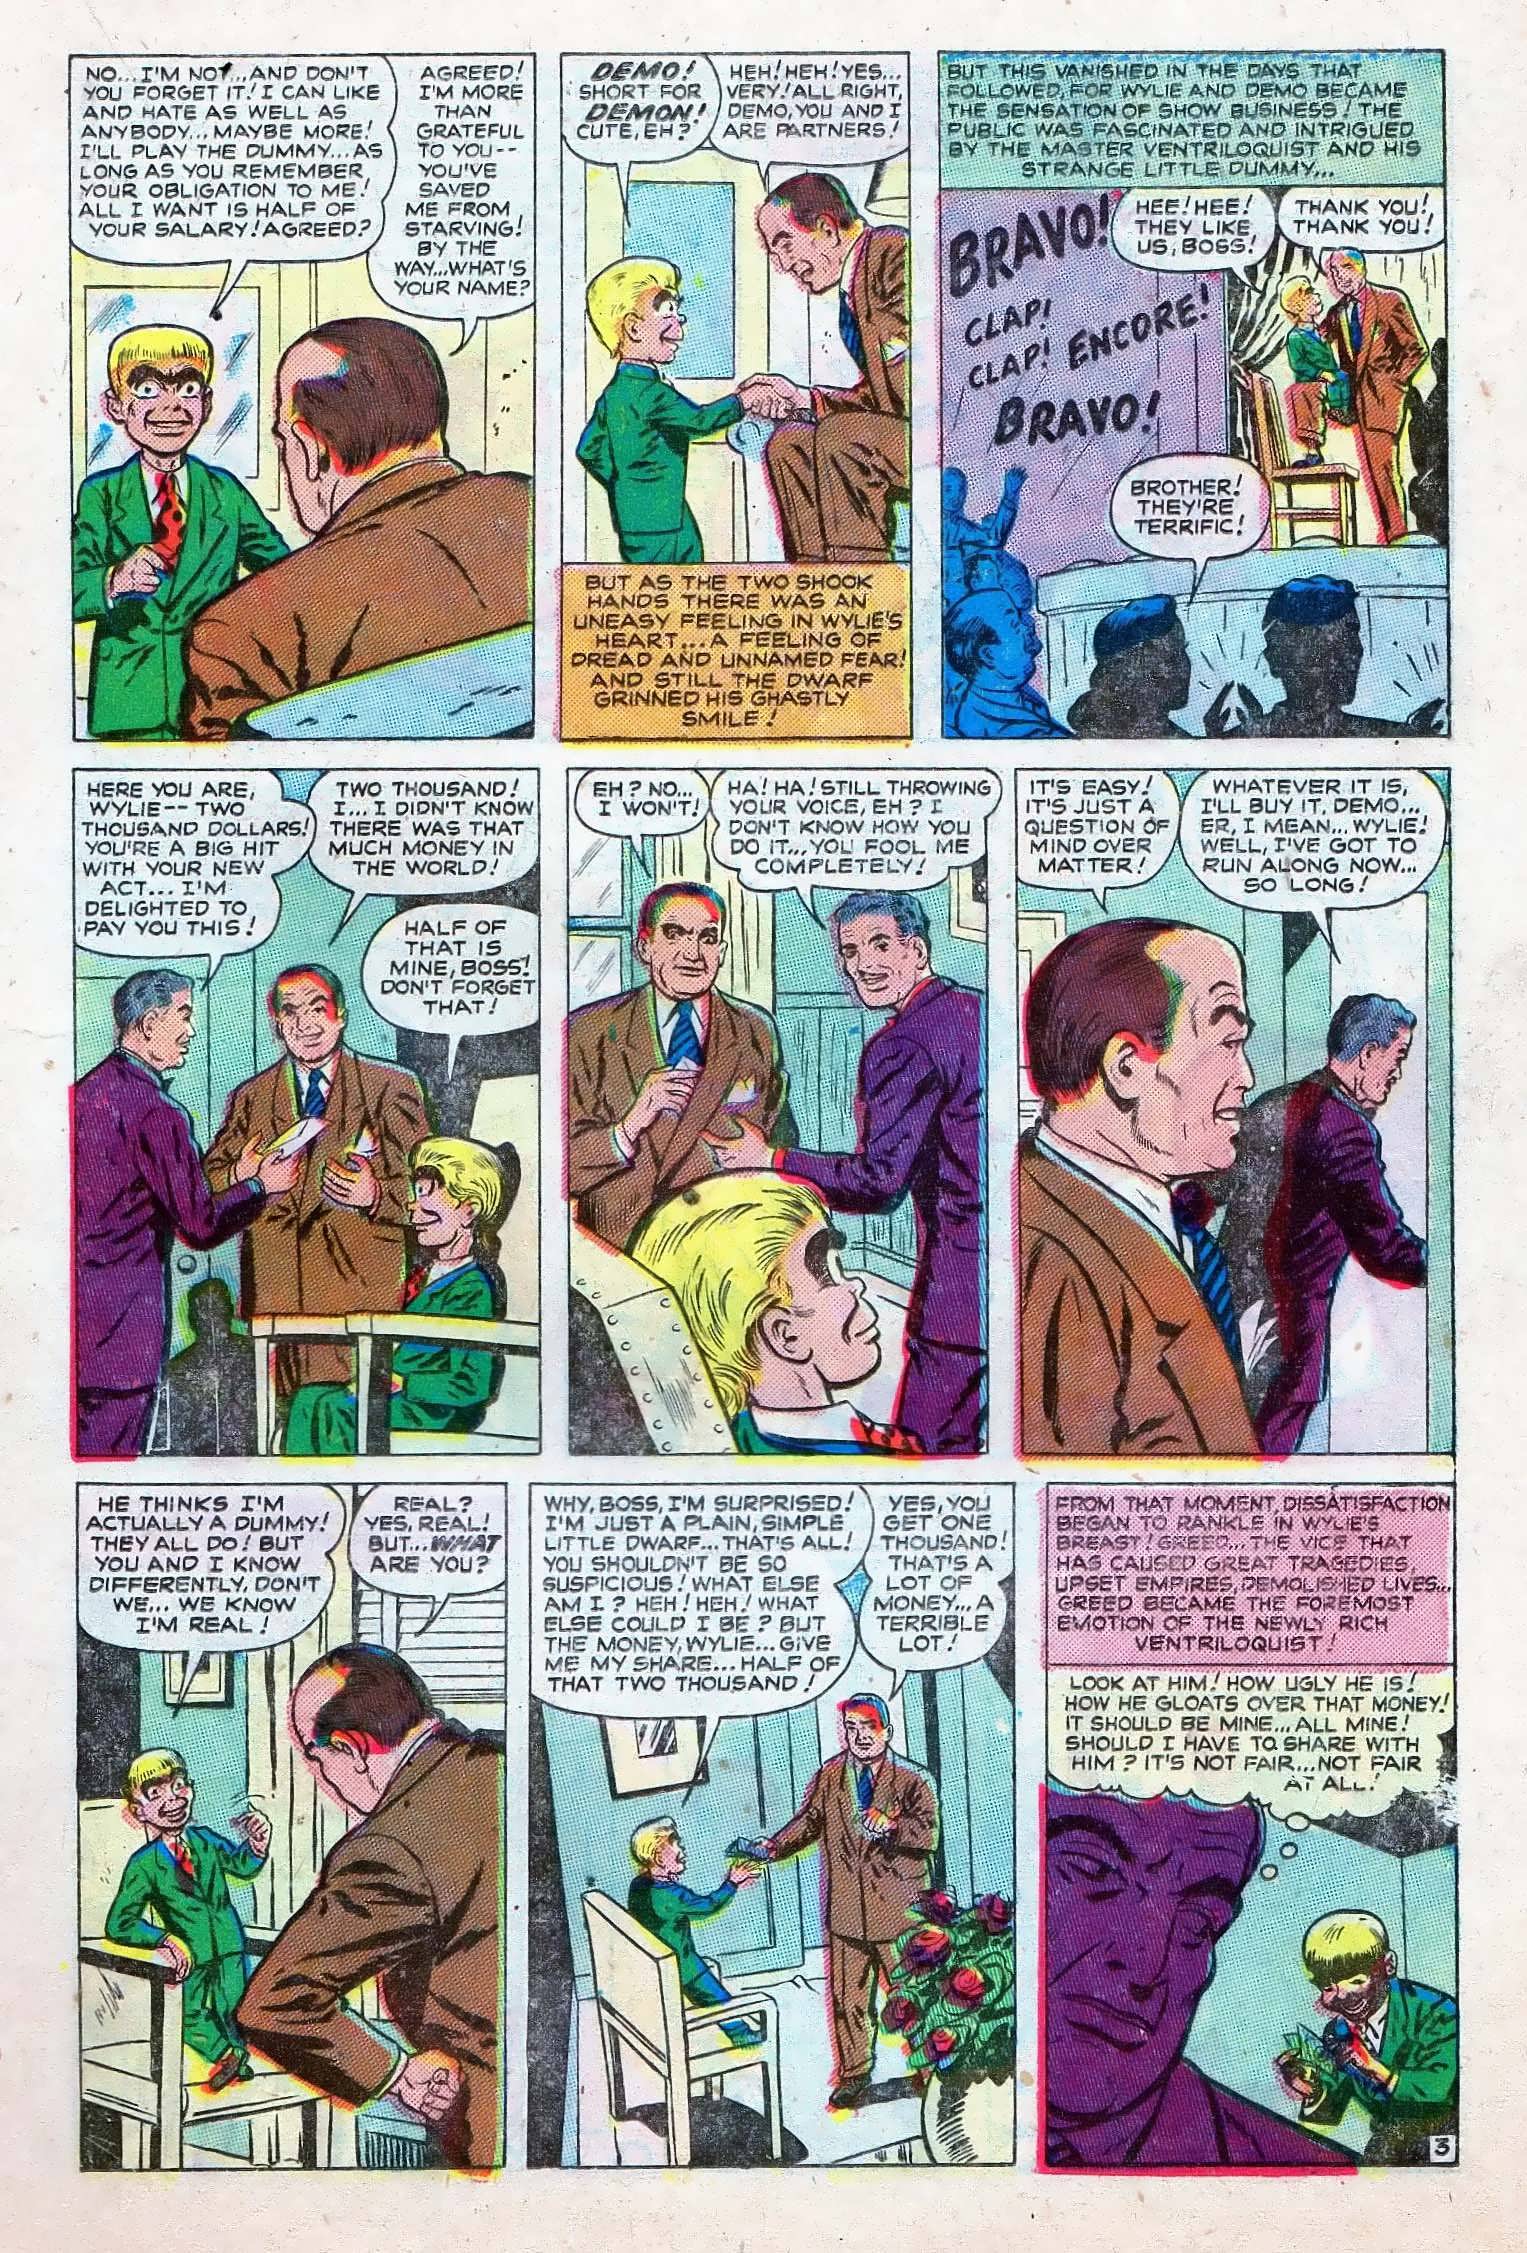 Marvel Tales (1949) 96 Page 14